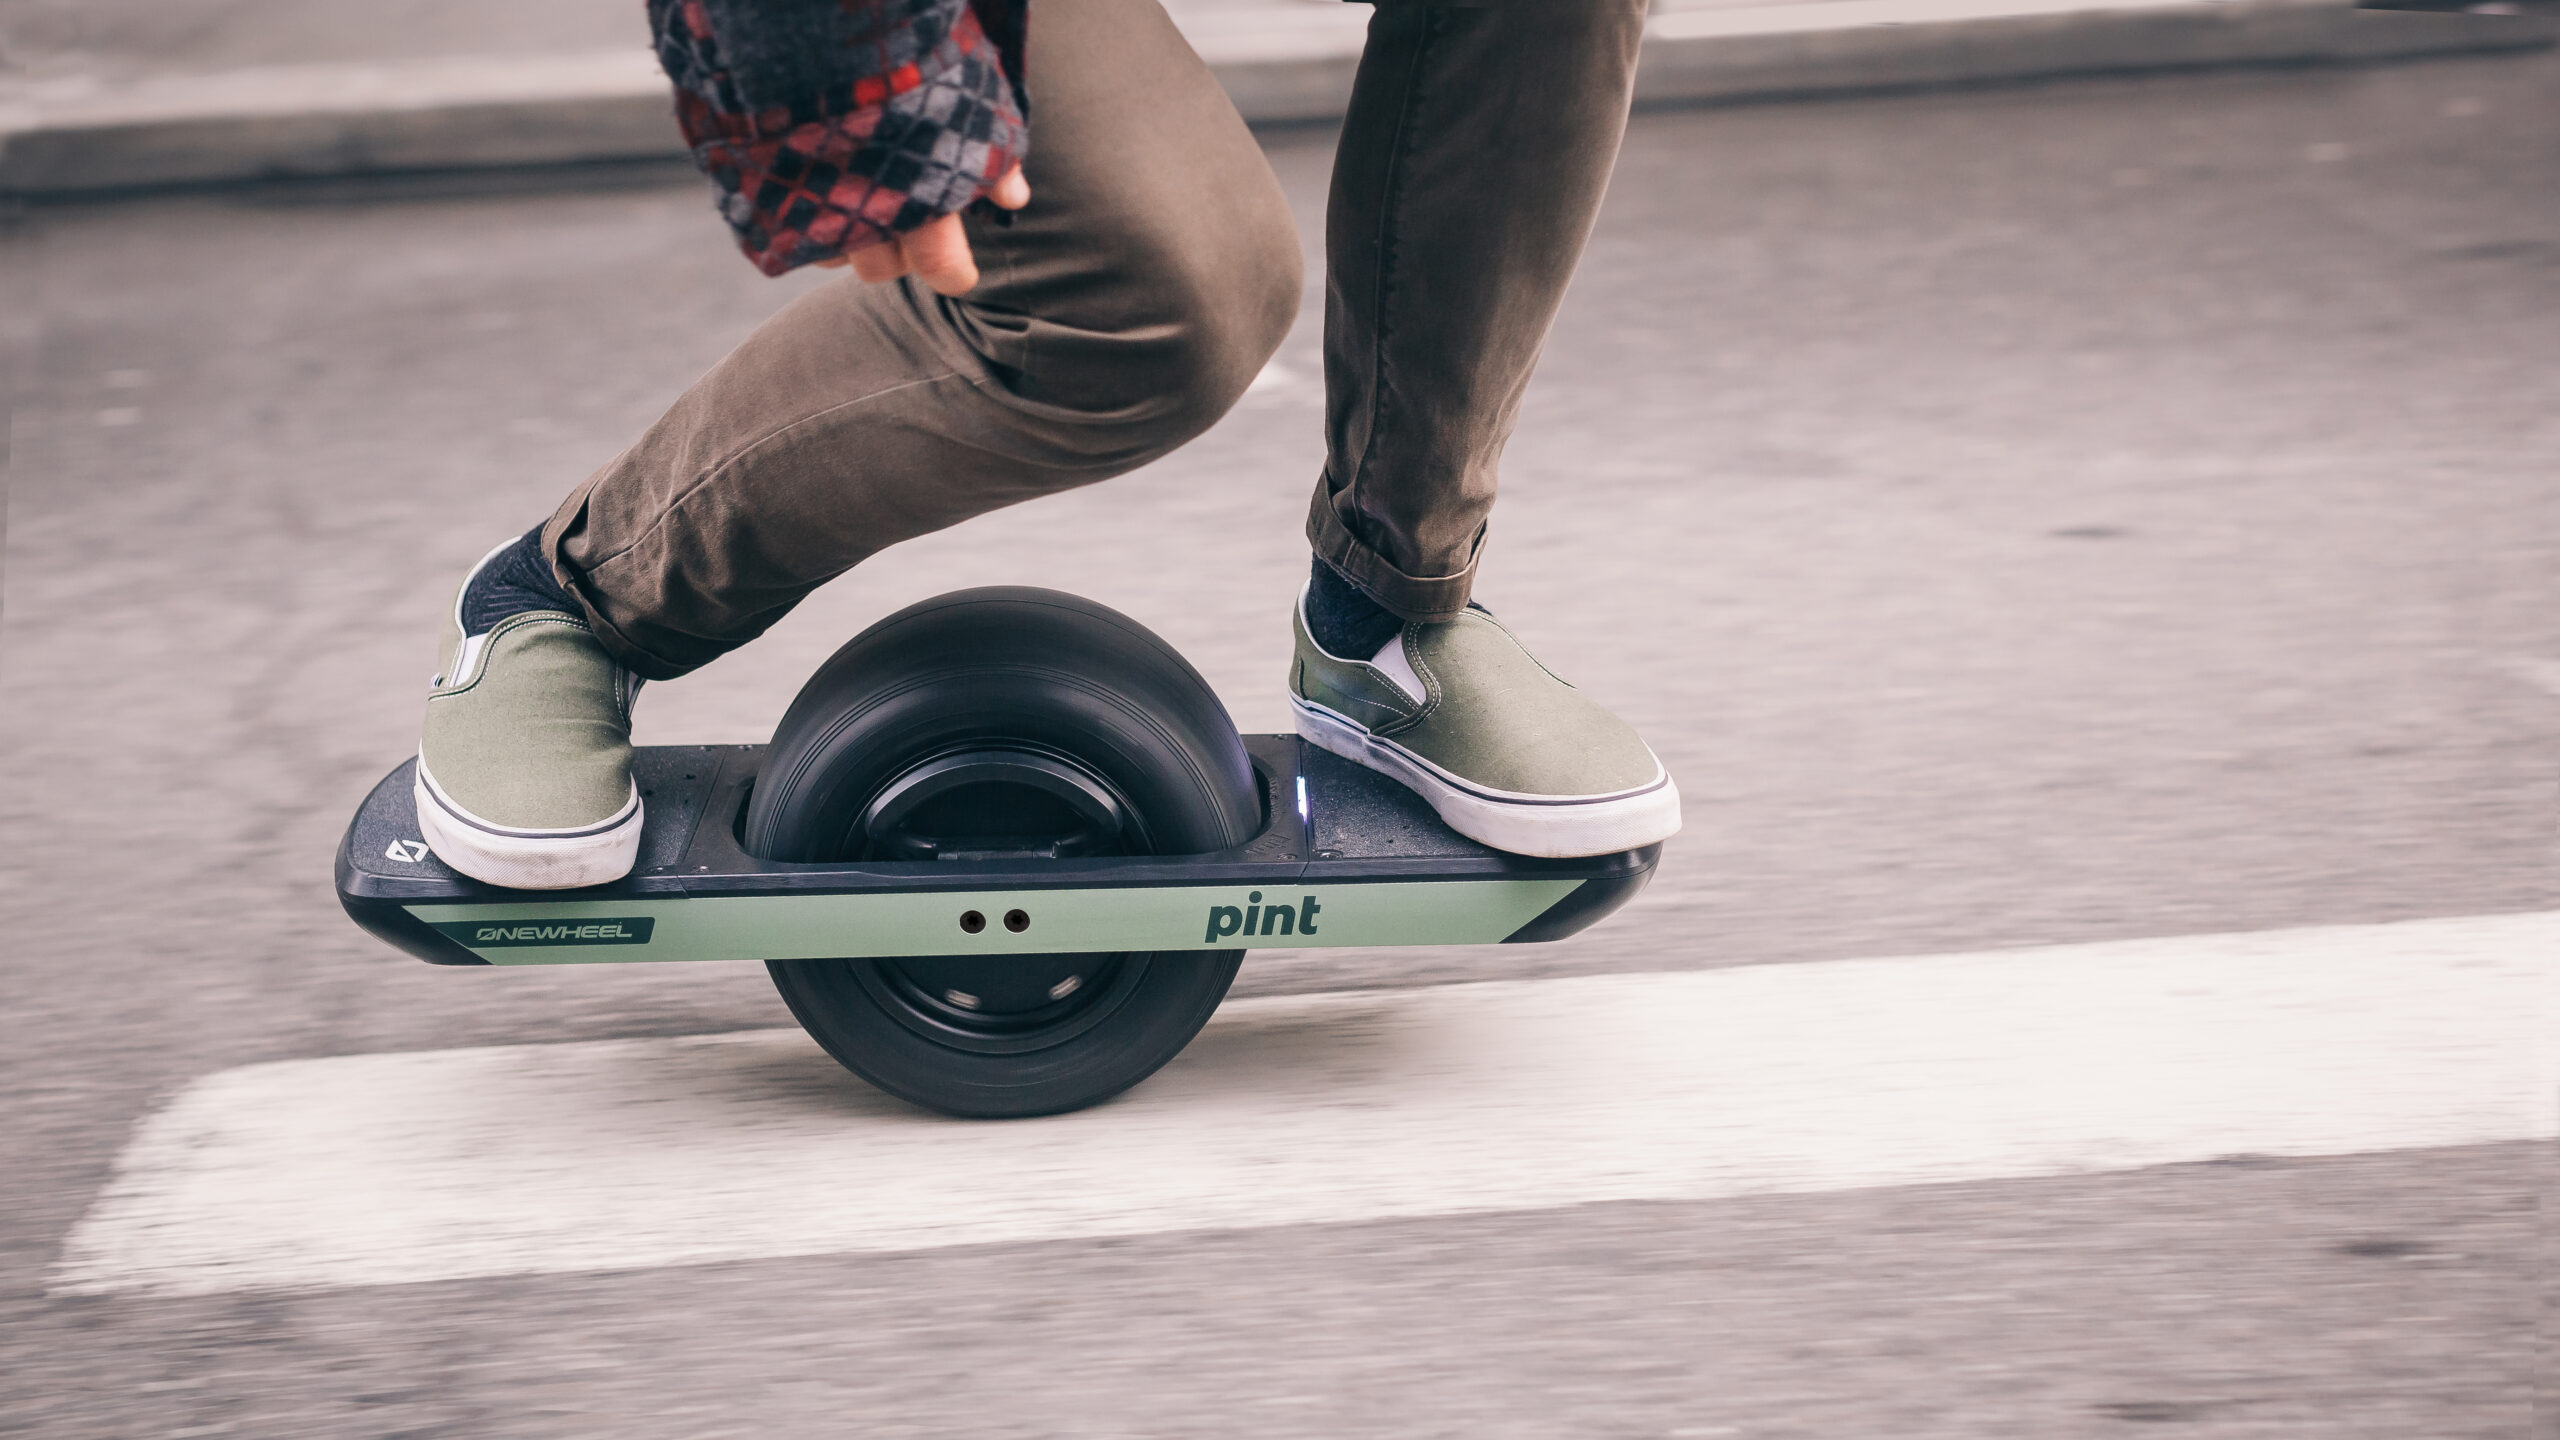 How this one-wheeled skateboard lets riders cruise without crashing